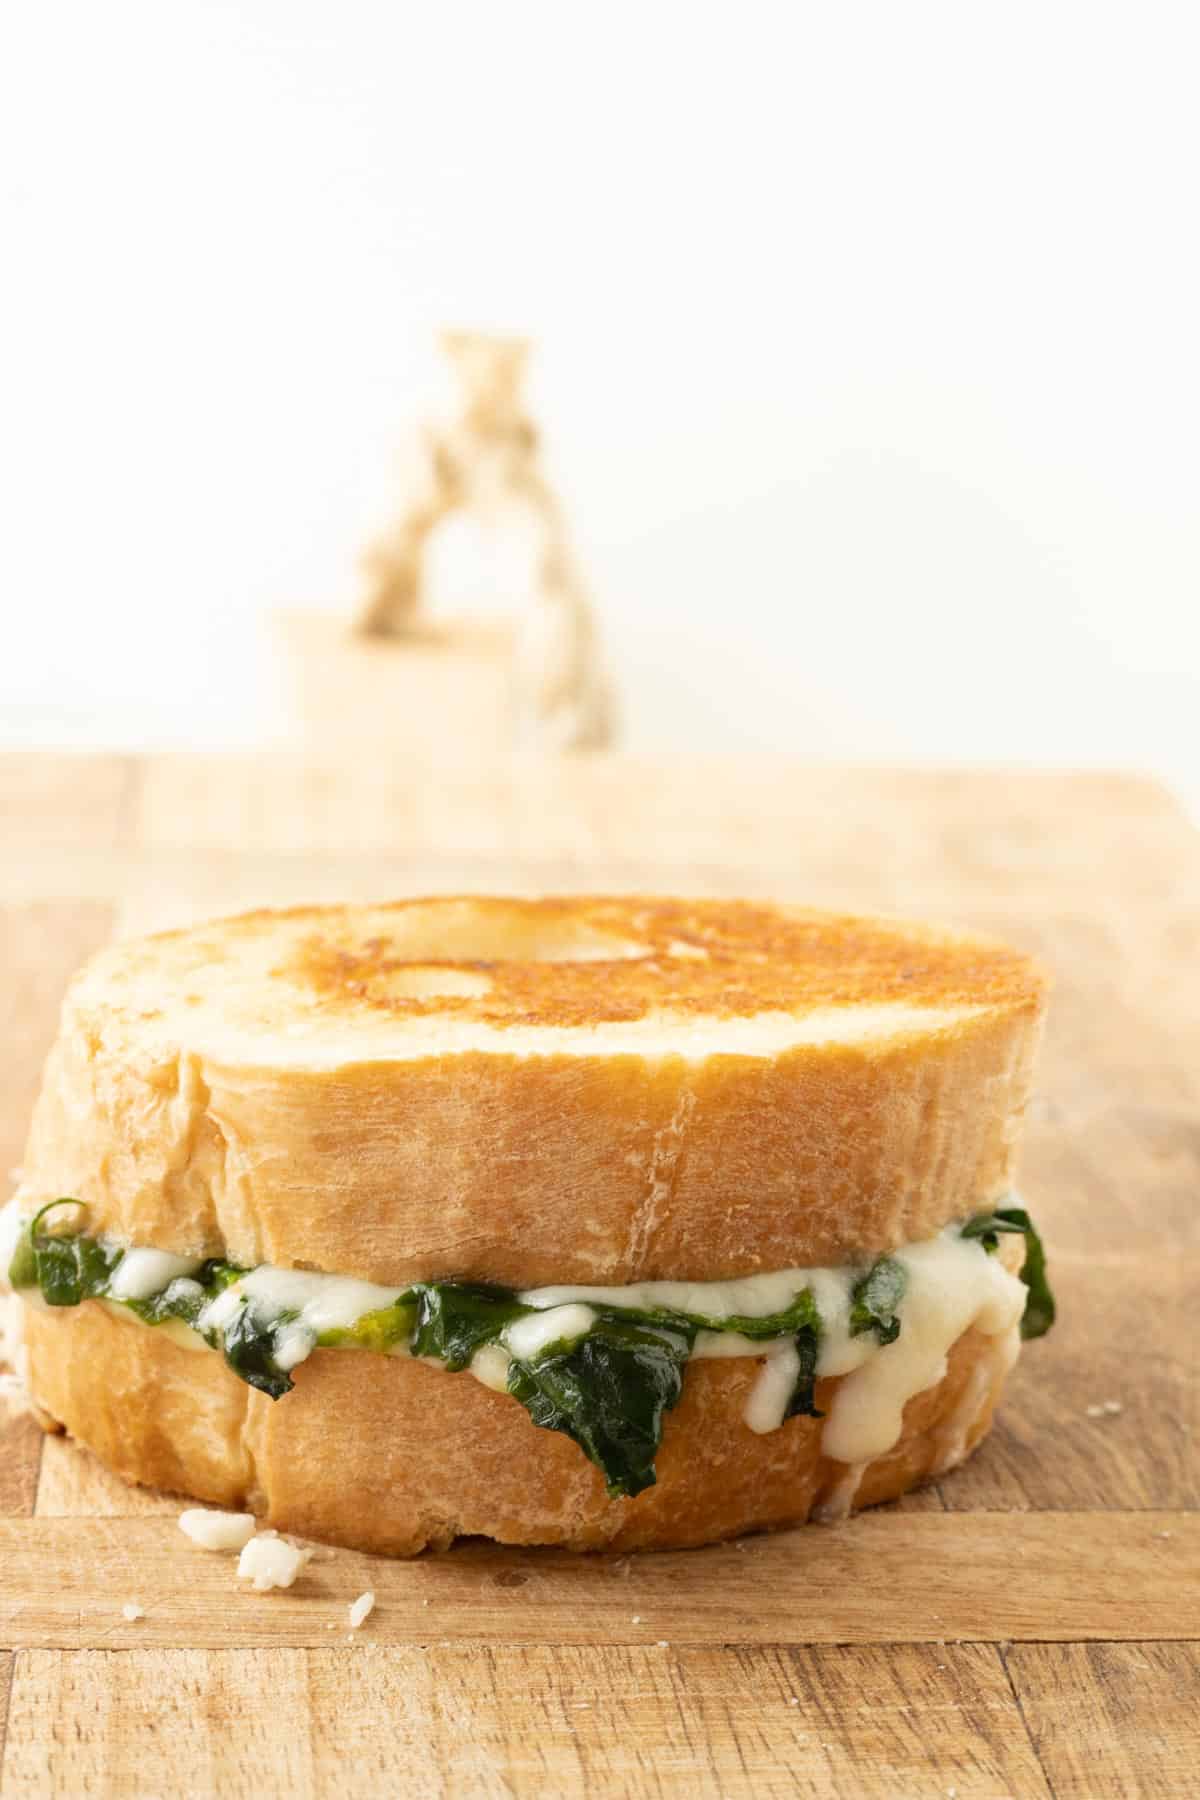 A toasted spinach and cheese sandwich on a wooden cutting board